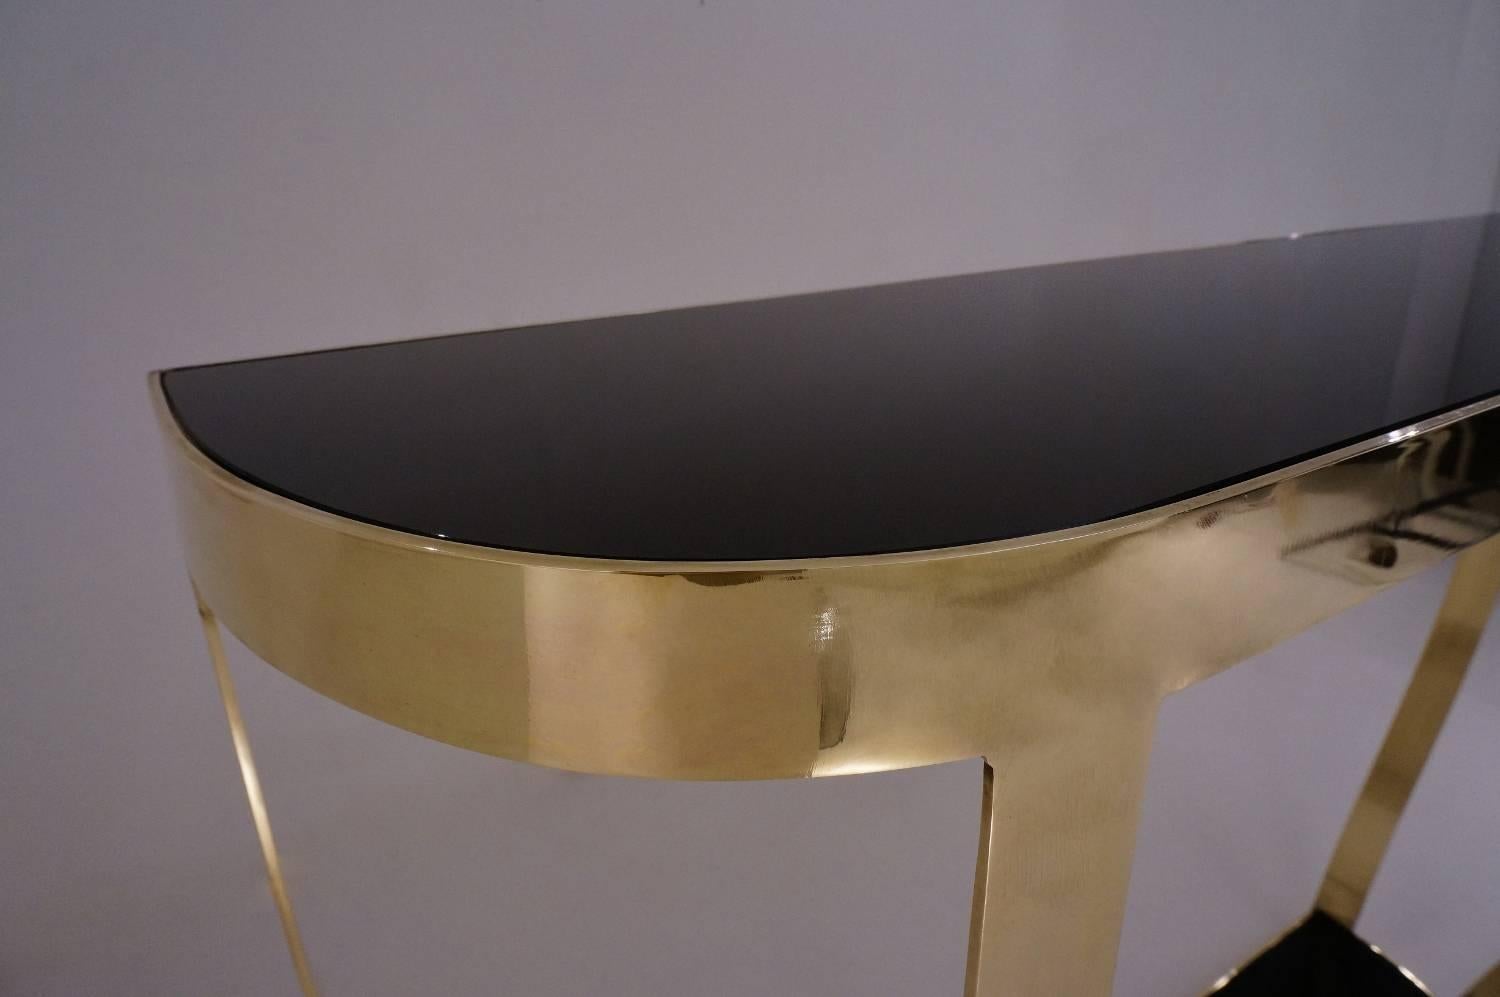 Pair of Console Tables, Solid Brass with Black Glass and Shelf, Italian 2